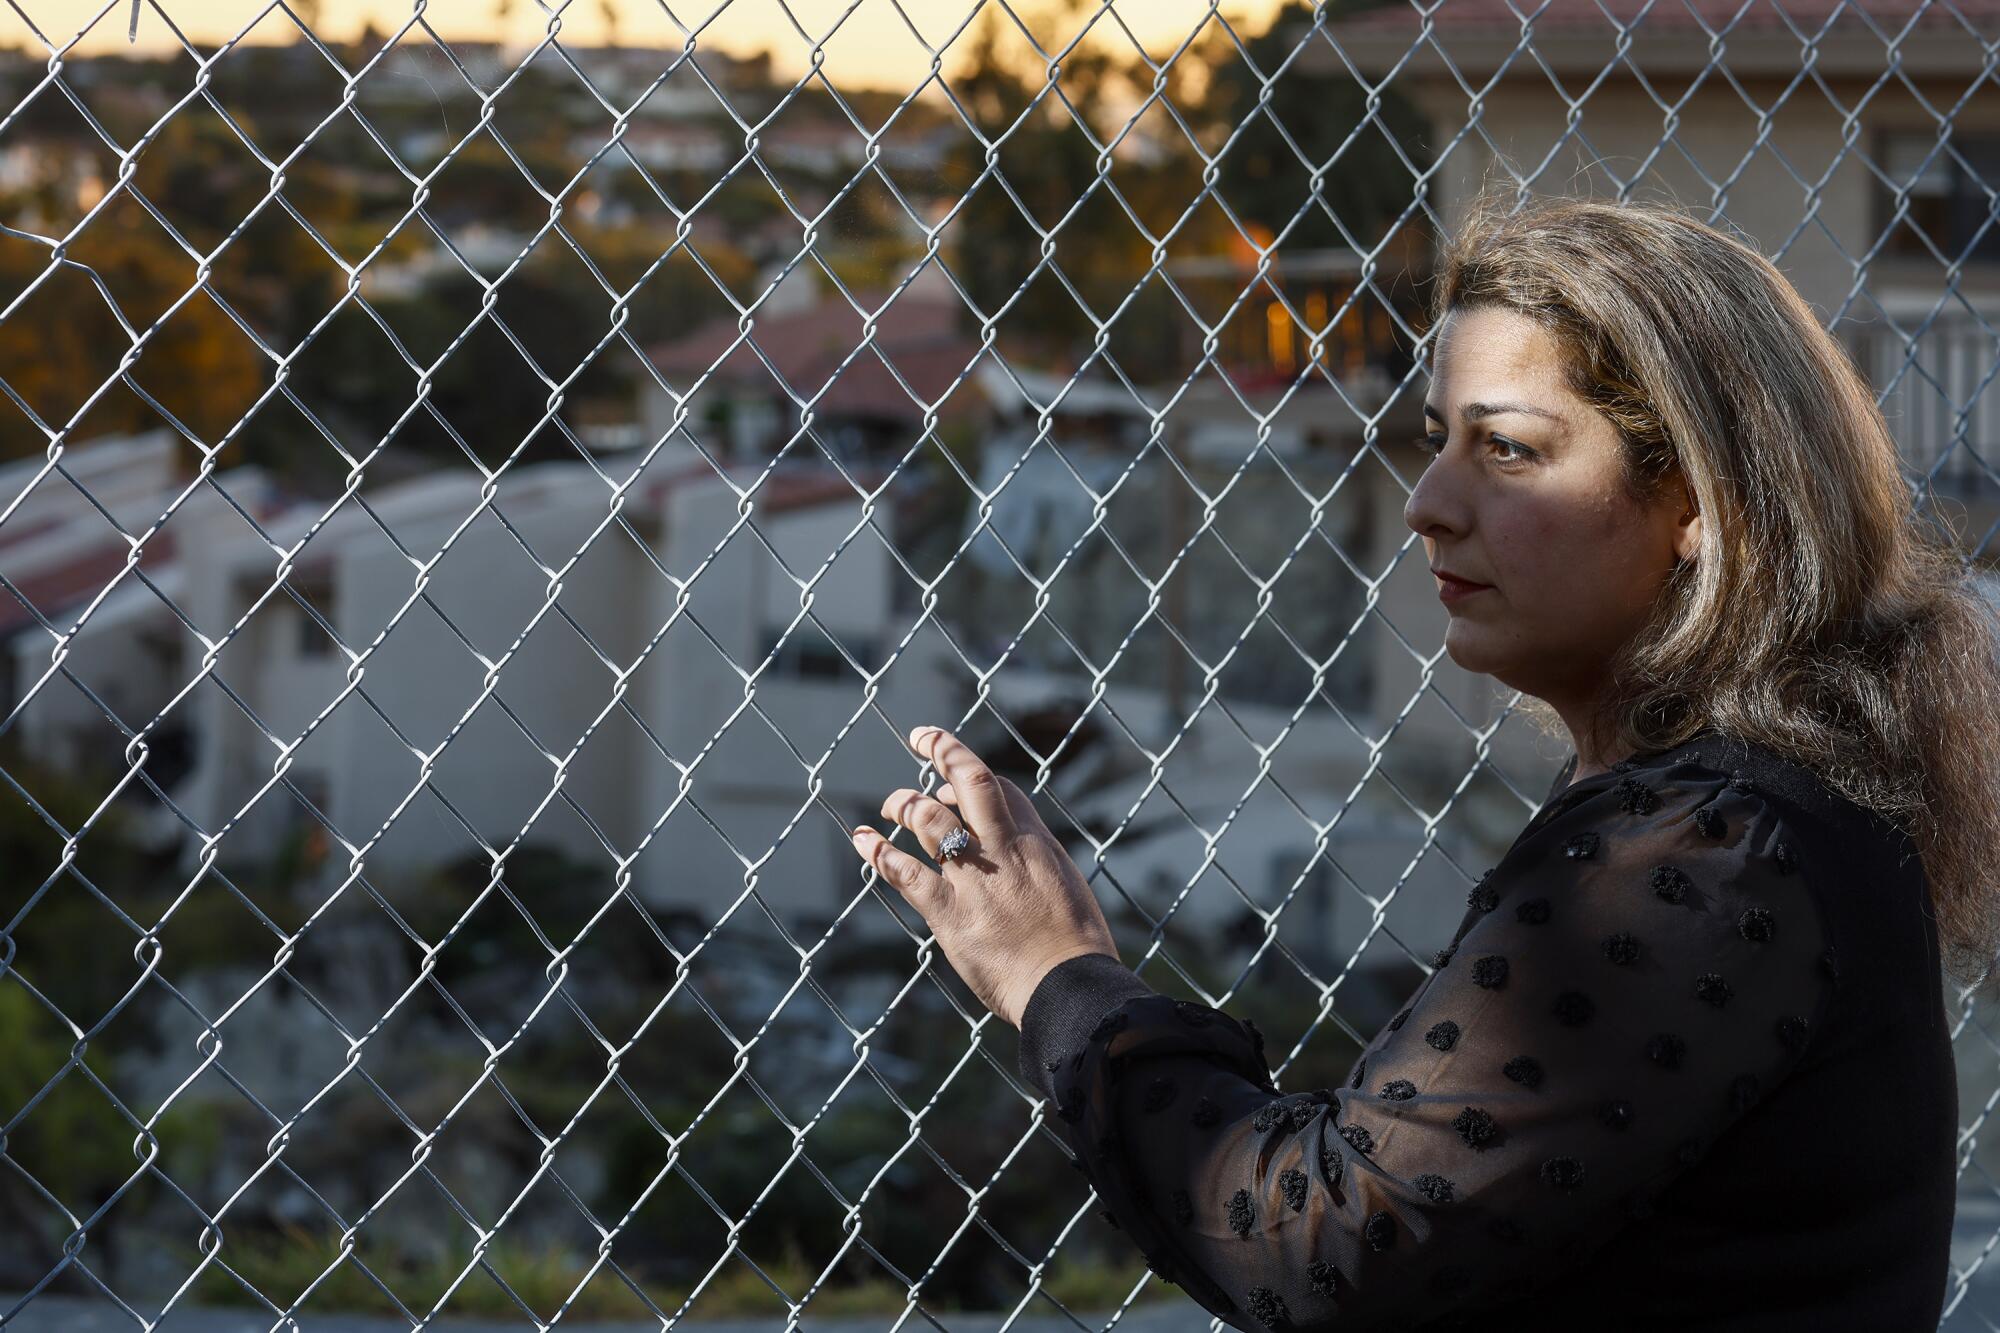 A woman holds onto a chain-link fence and looks into the distance.